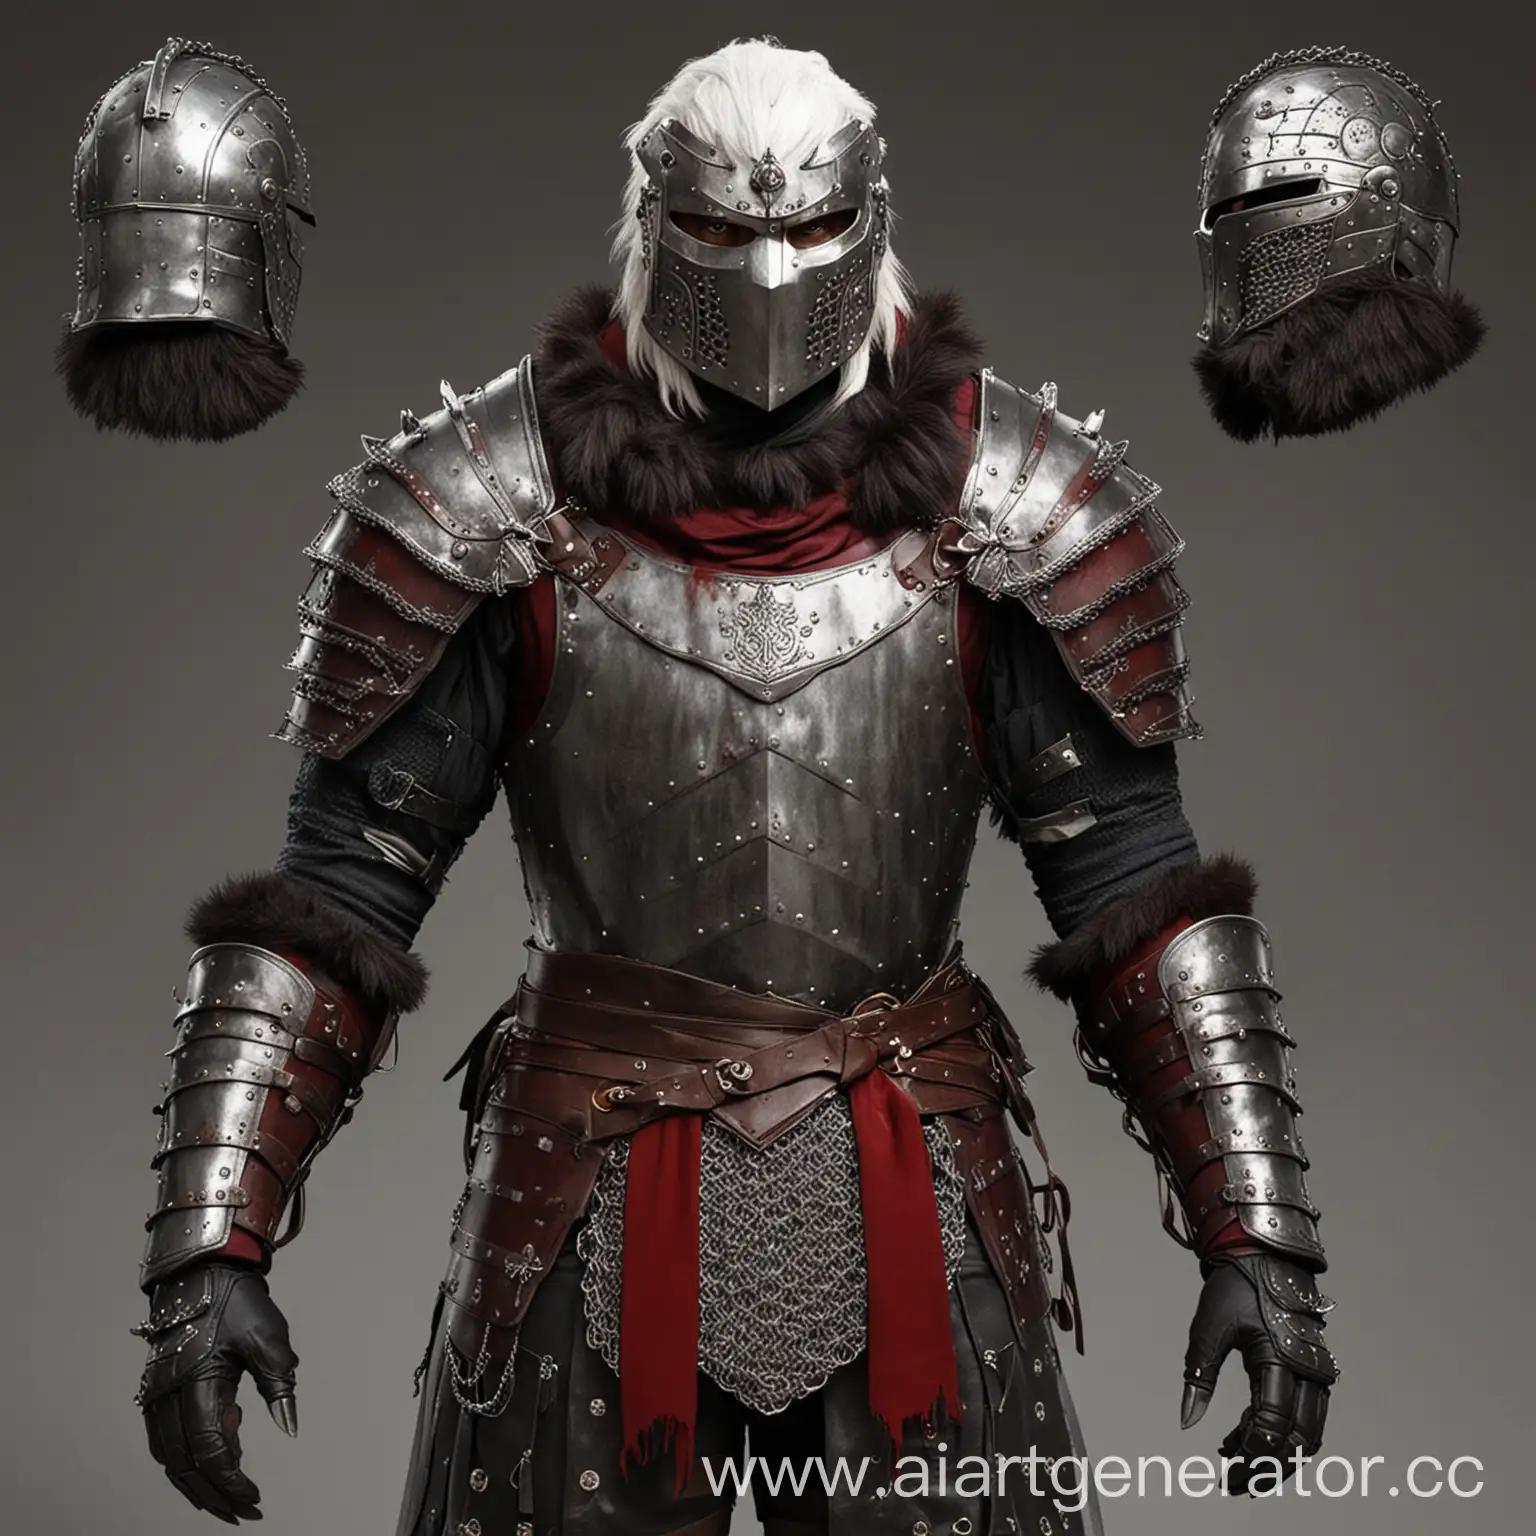 Your armor is called the "Blood Wolf Set", it is a helmet with an iron chainmail mask and a white mane on the back of your head, chain mail and a dark scarlet tunic under it, dark gray knight's plate greaves and knight's plate bracers, shoulder pads with slightly wolf fur